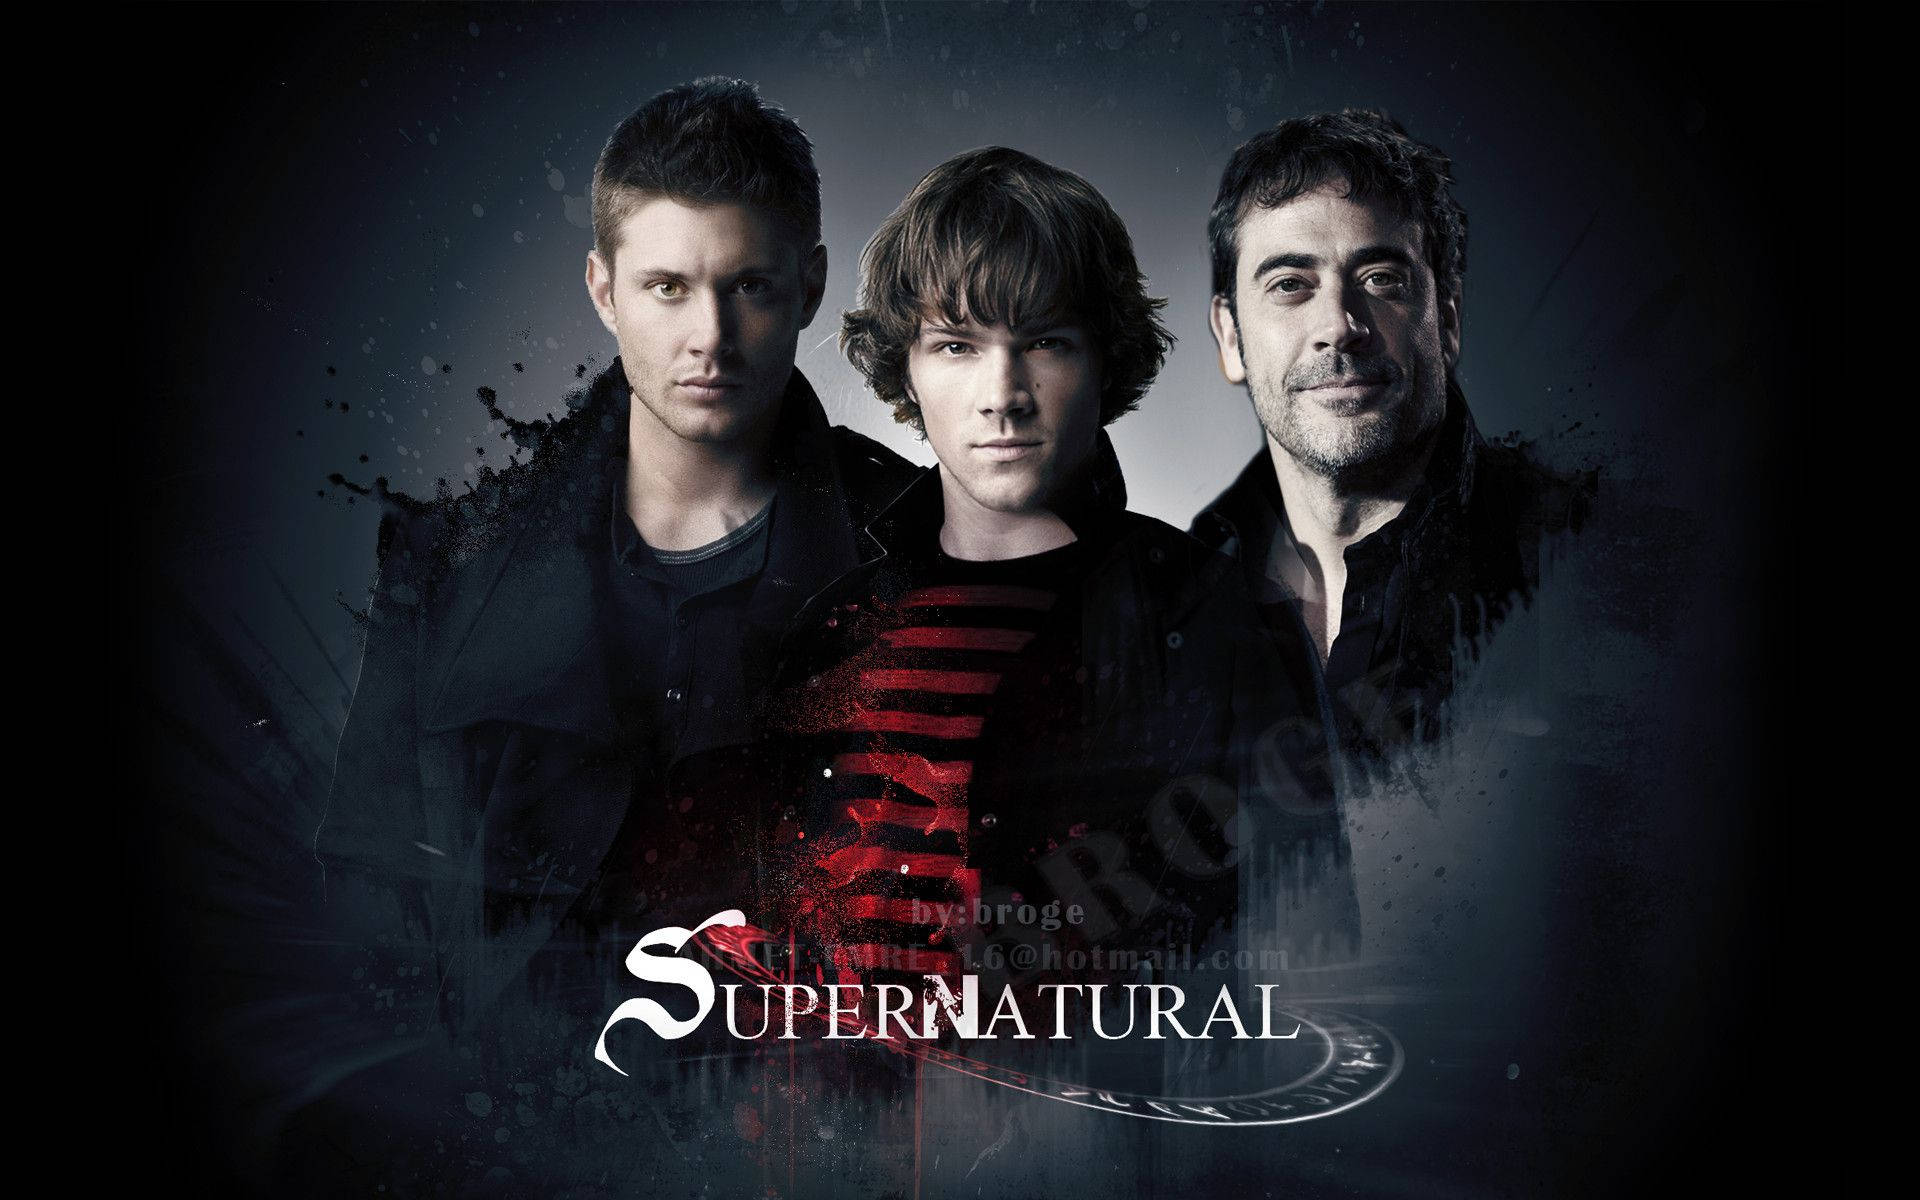 Dean, Sam, and John Winchester - The Winchester Brothers - Bonded by Fate Wallpaper